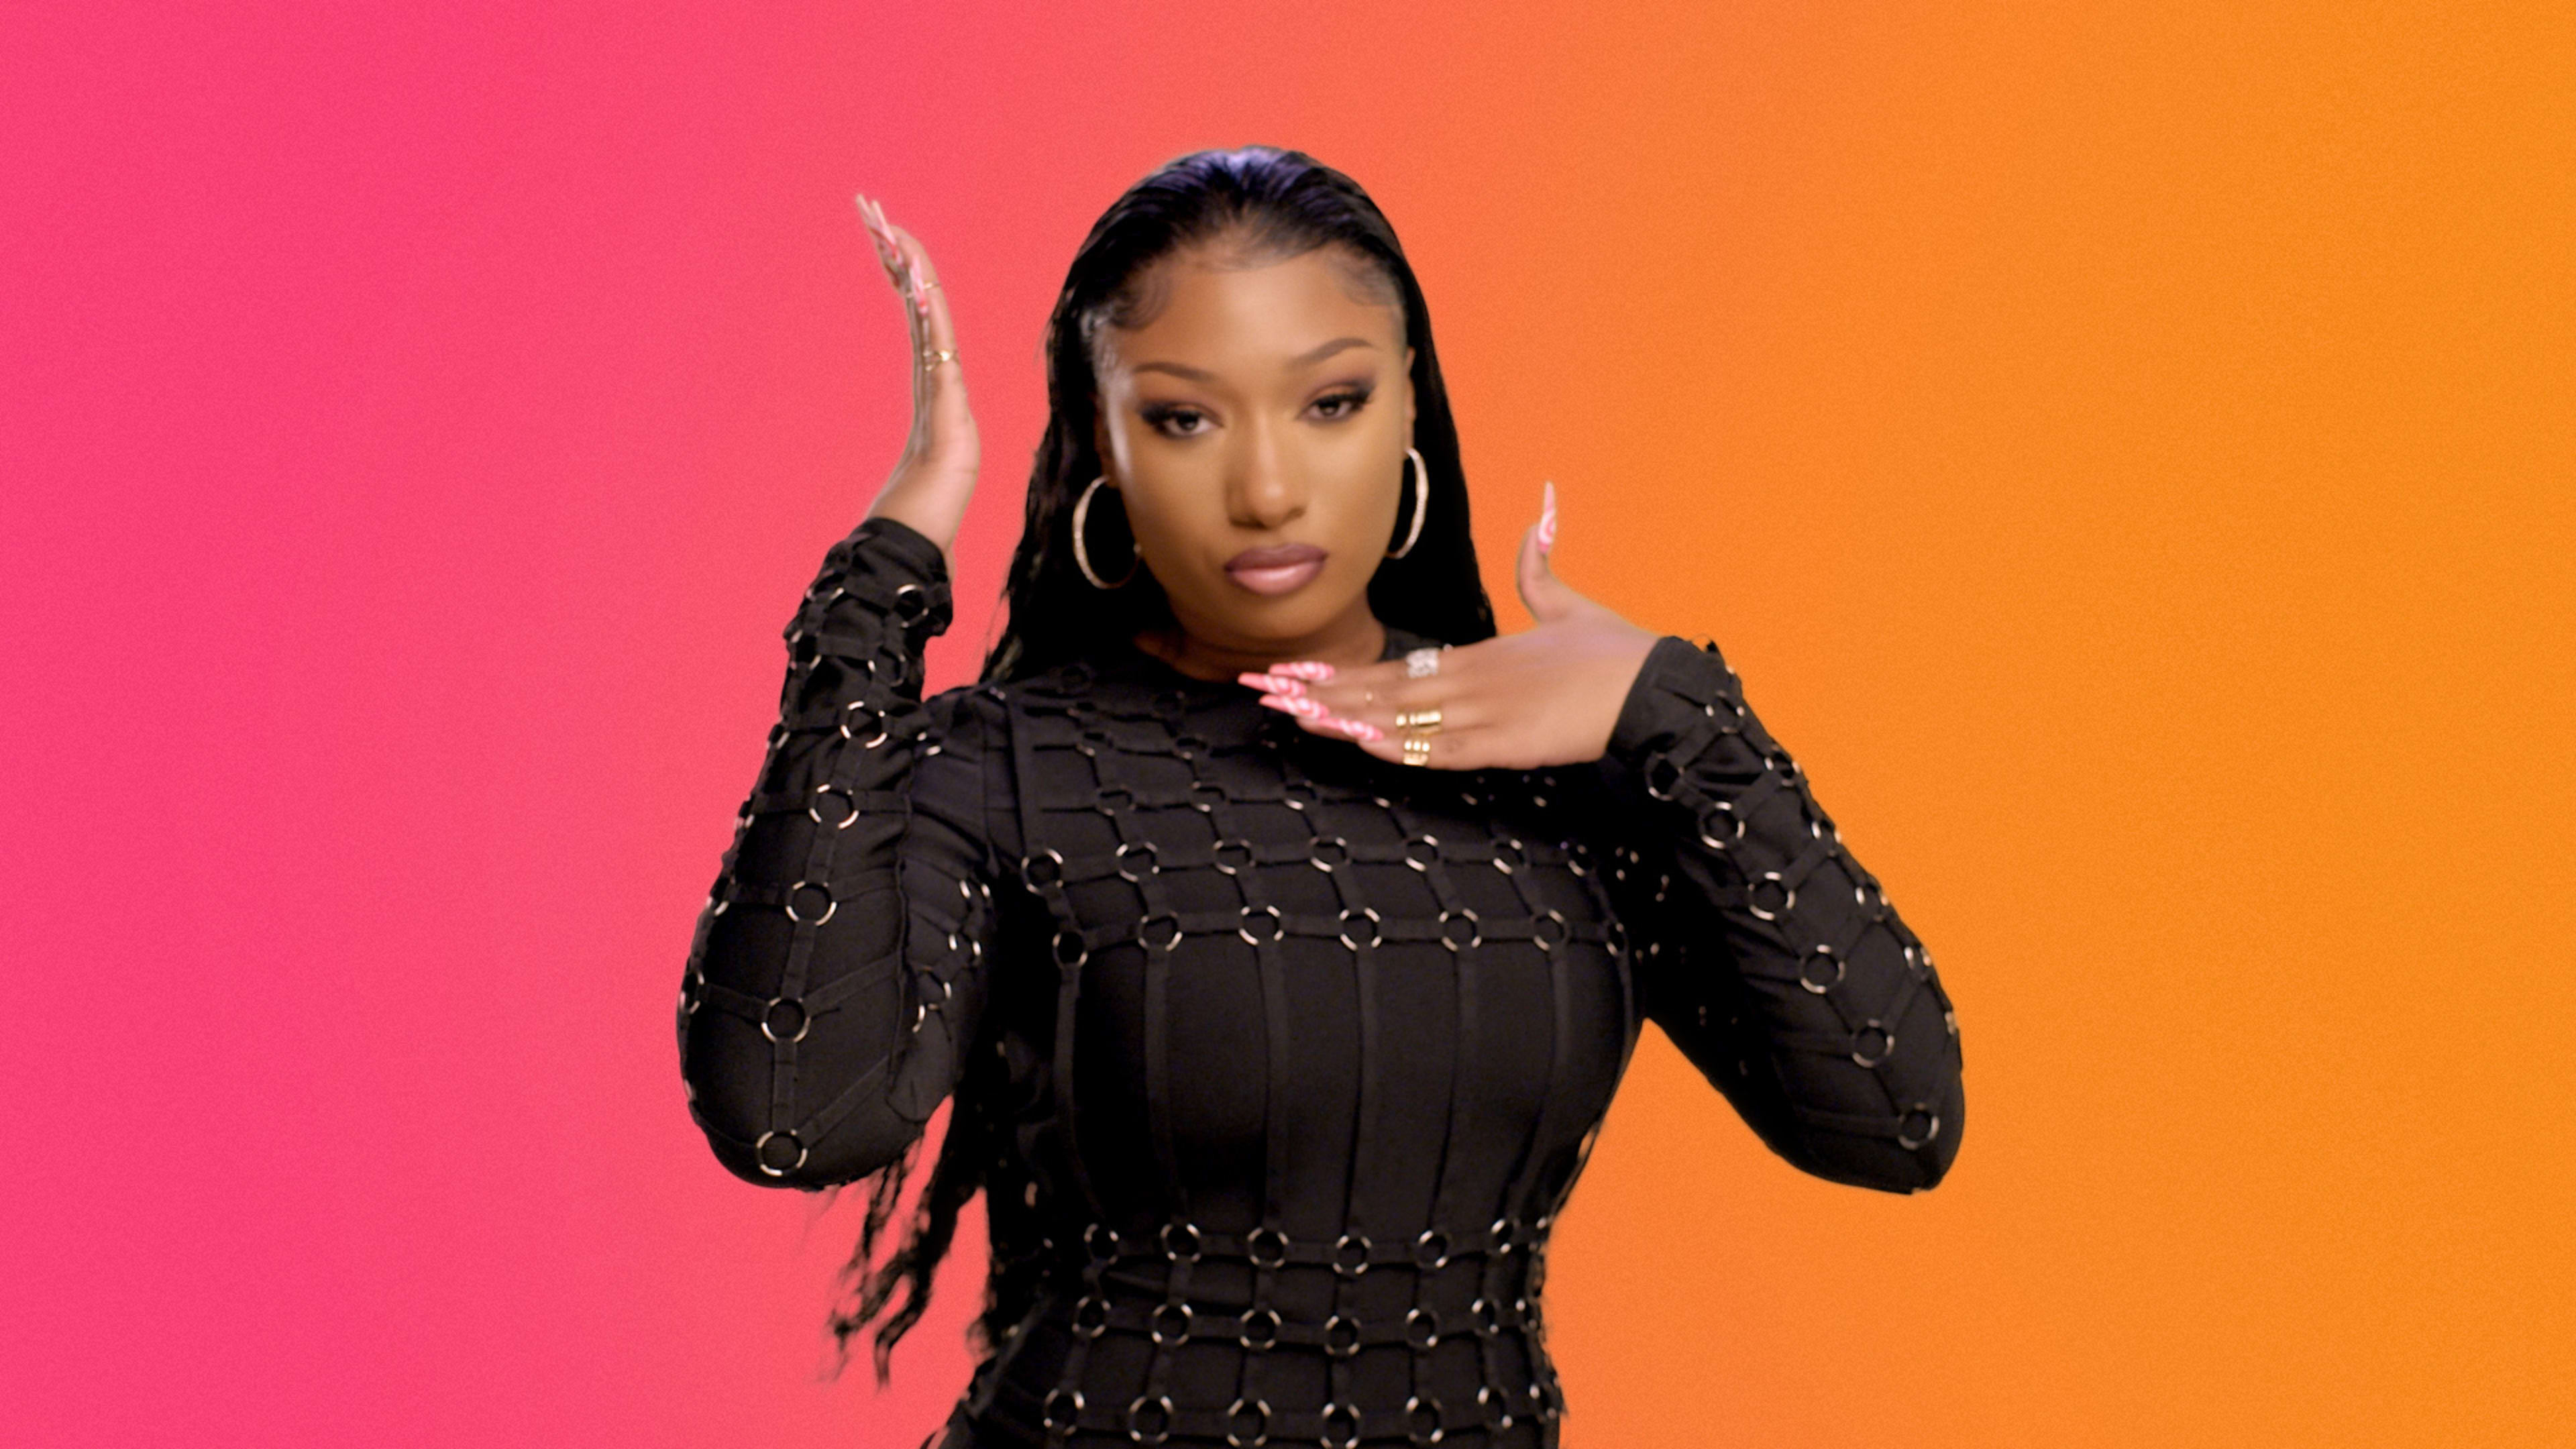 Tinder and Megan Thee Stallion will give you $10,000 to stop being so shy in your profile